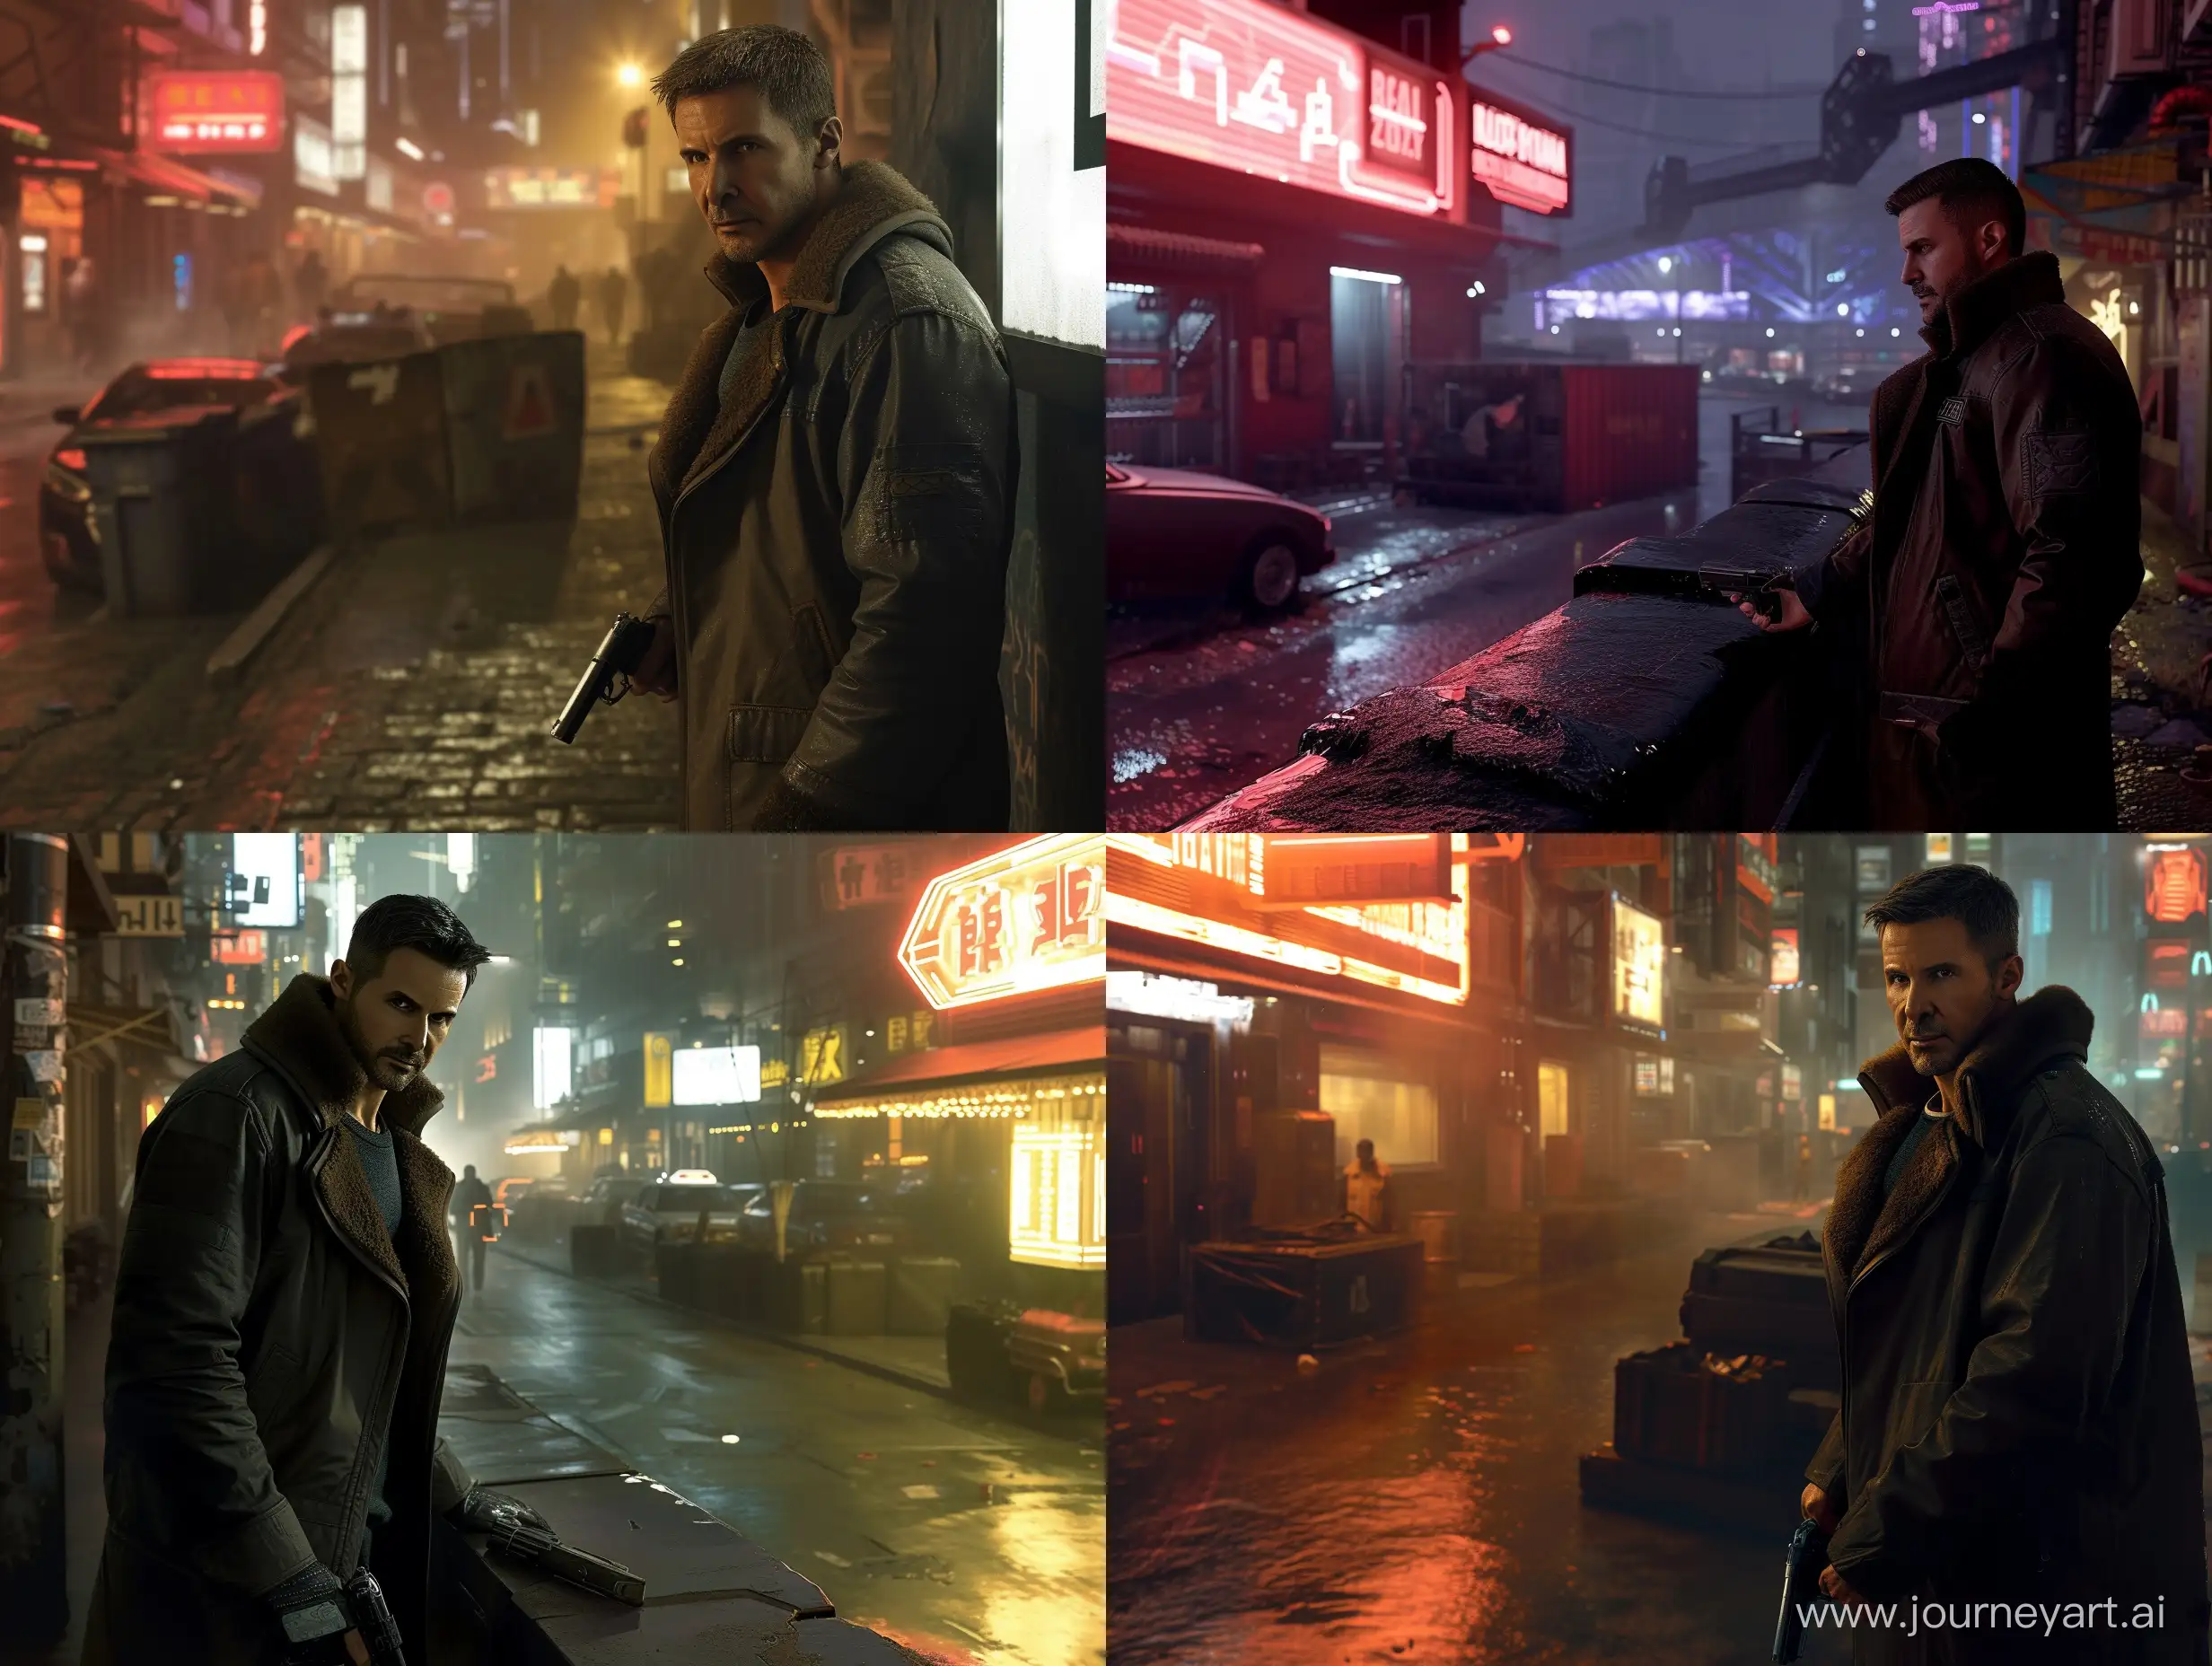 "Blade Runner 2049" is a third-person video game taking place in a futuristic urban setting with cutting-edge ray tracing visuals. Specifically developed for the PS5 system, this version of the game showcases a male protagonist standing by a street, armed with a pistol, and an expansive open-world environment driven by the Unreal Engine, set in the nighttime.